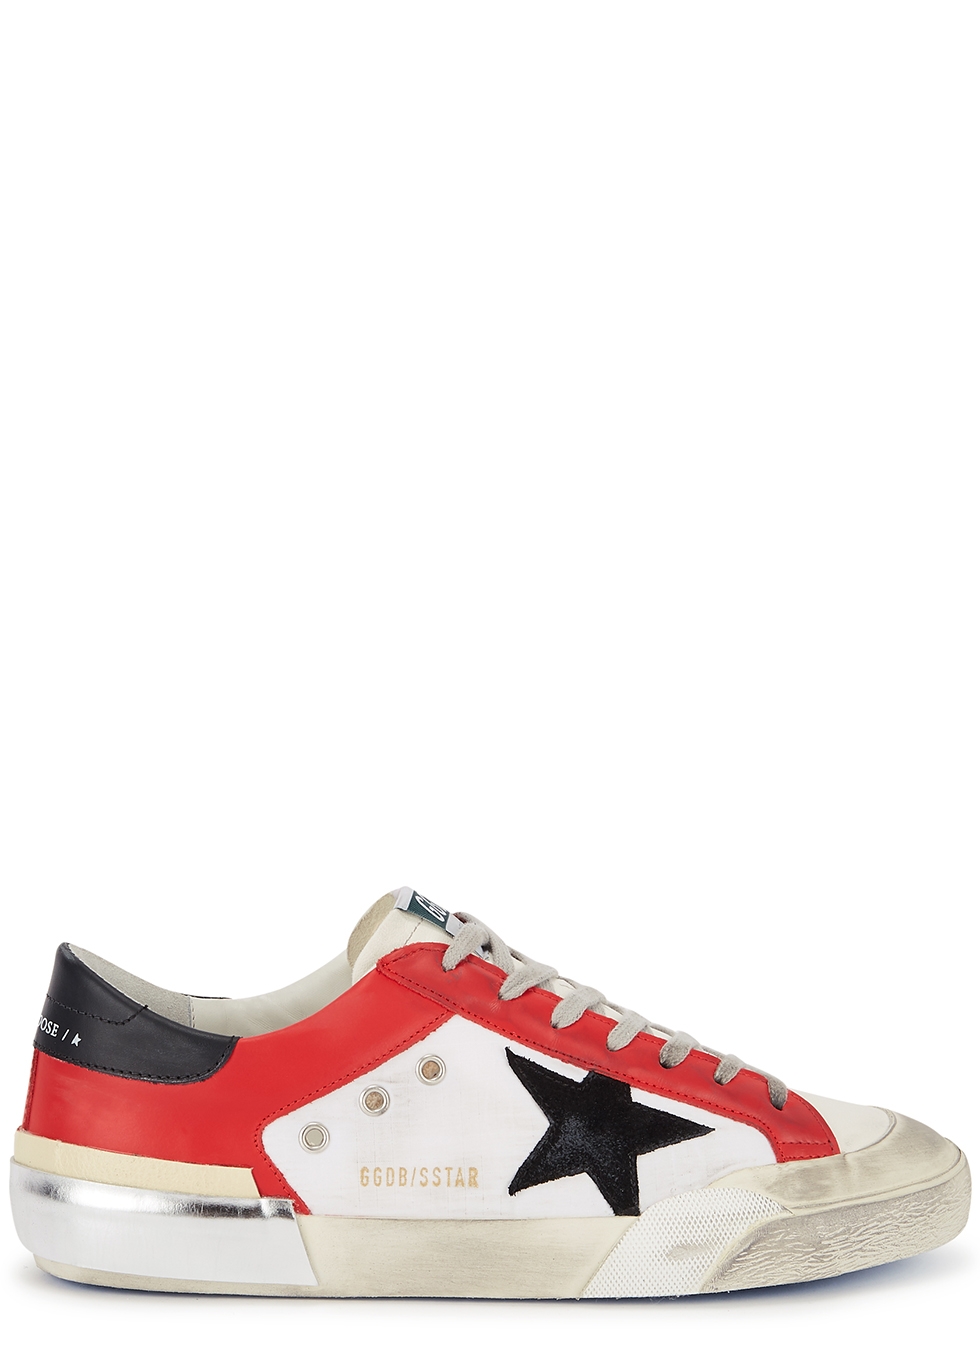 Superstar panelled leather sneakers